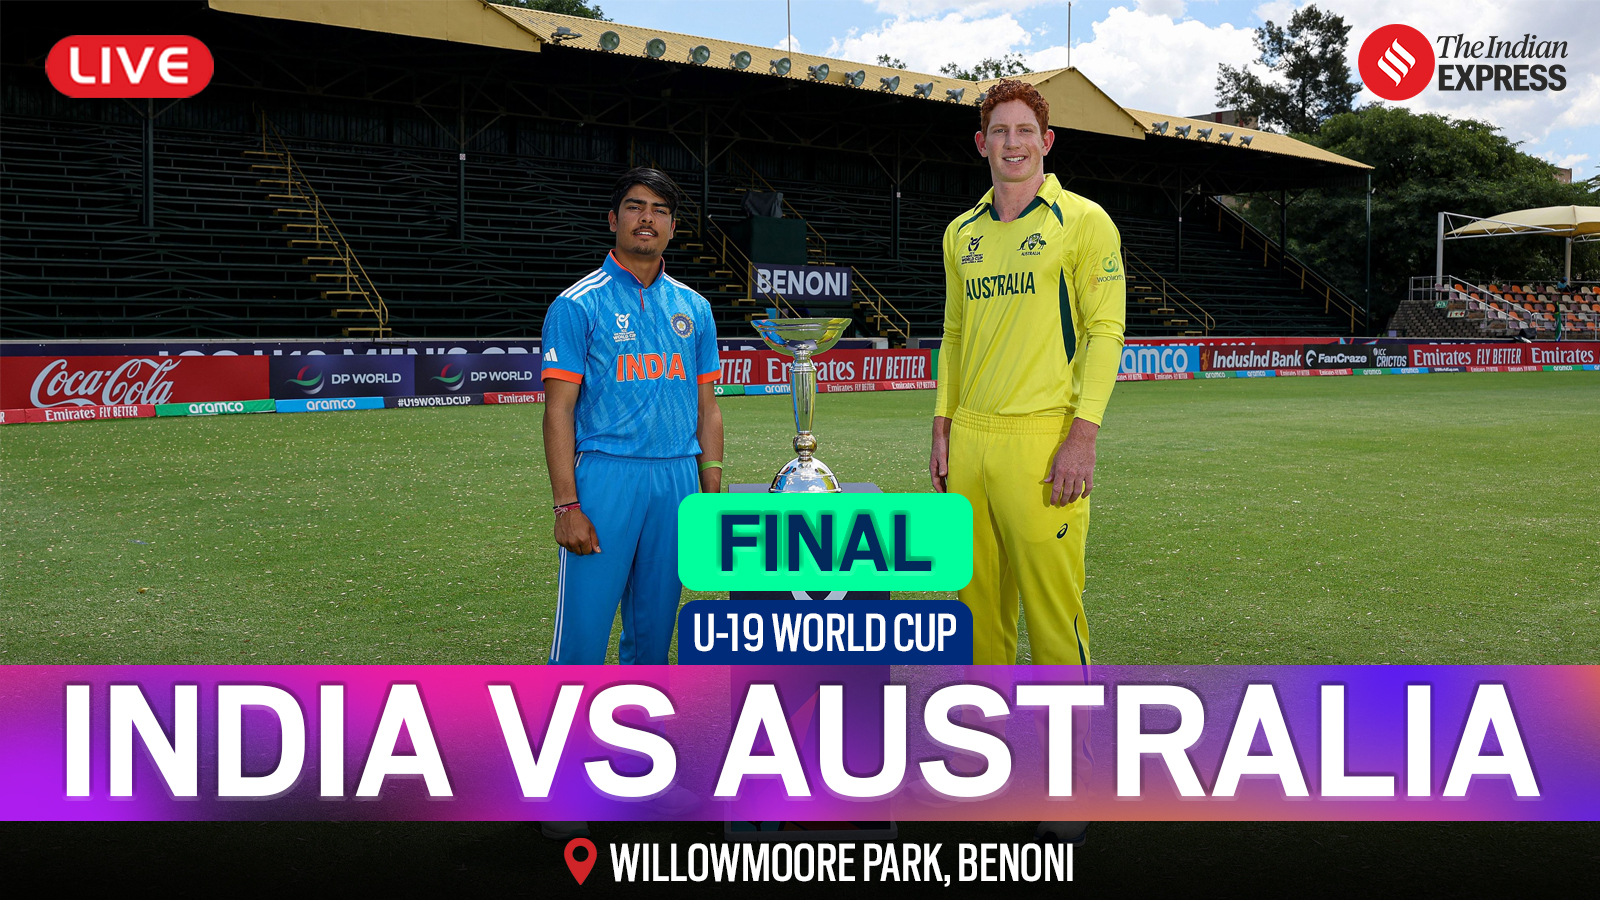 U19 World Cup 2024 Final: Raj Limbani Claims Third Wicket, Anderson Out for Australia with Score at 235/7 | Live Cricket Updates from India vs Australia